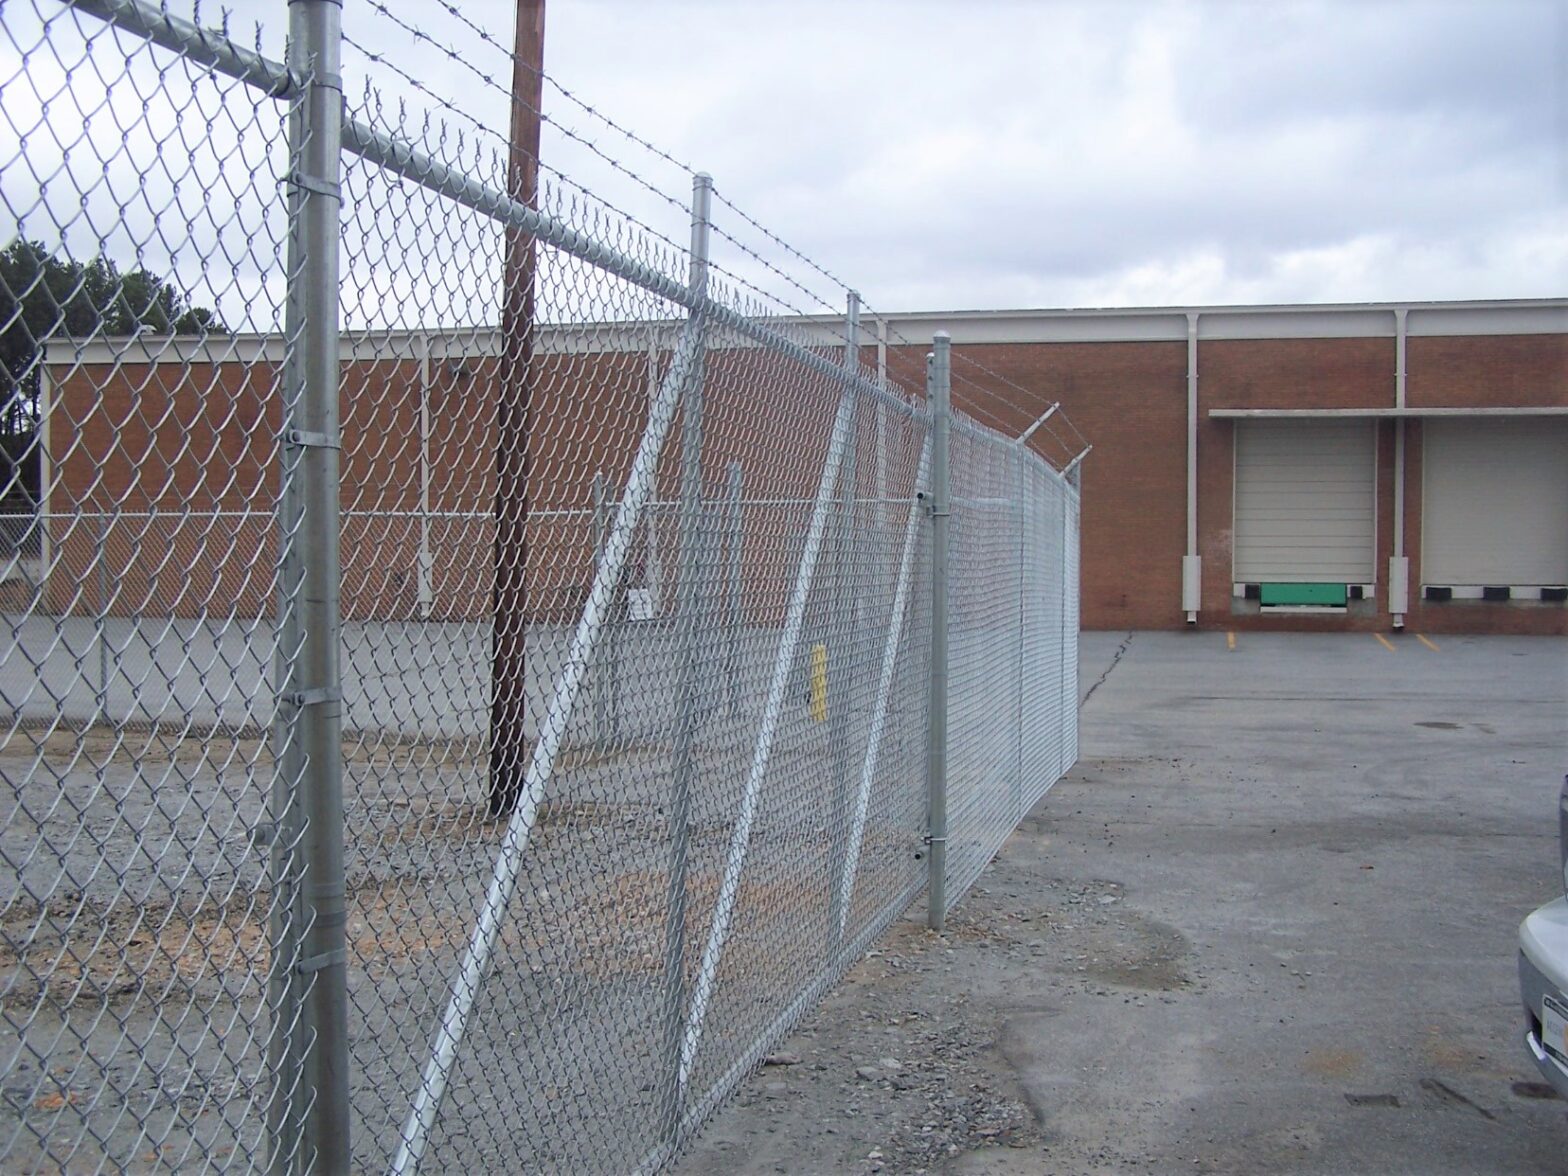 Photo of a Norcross, Georgia chain link security fence